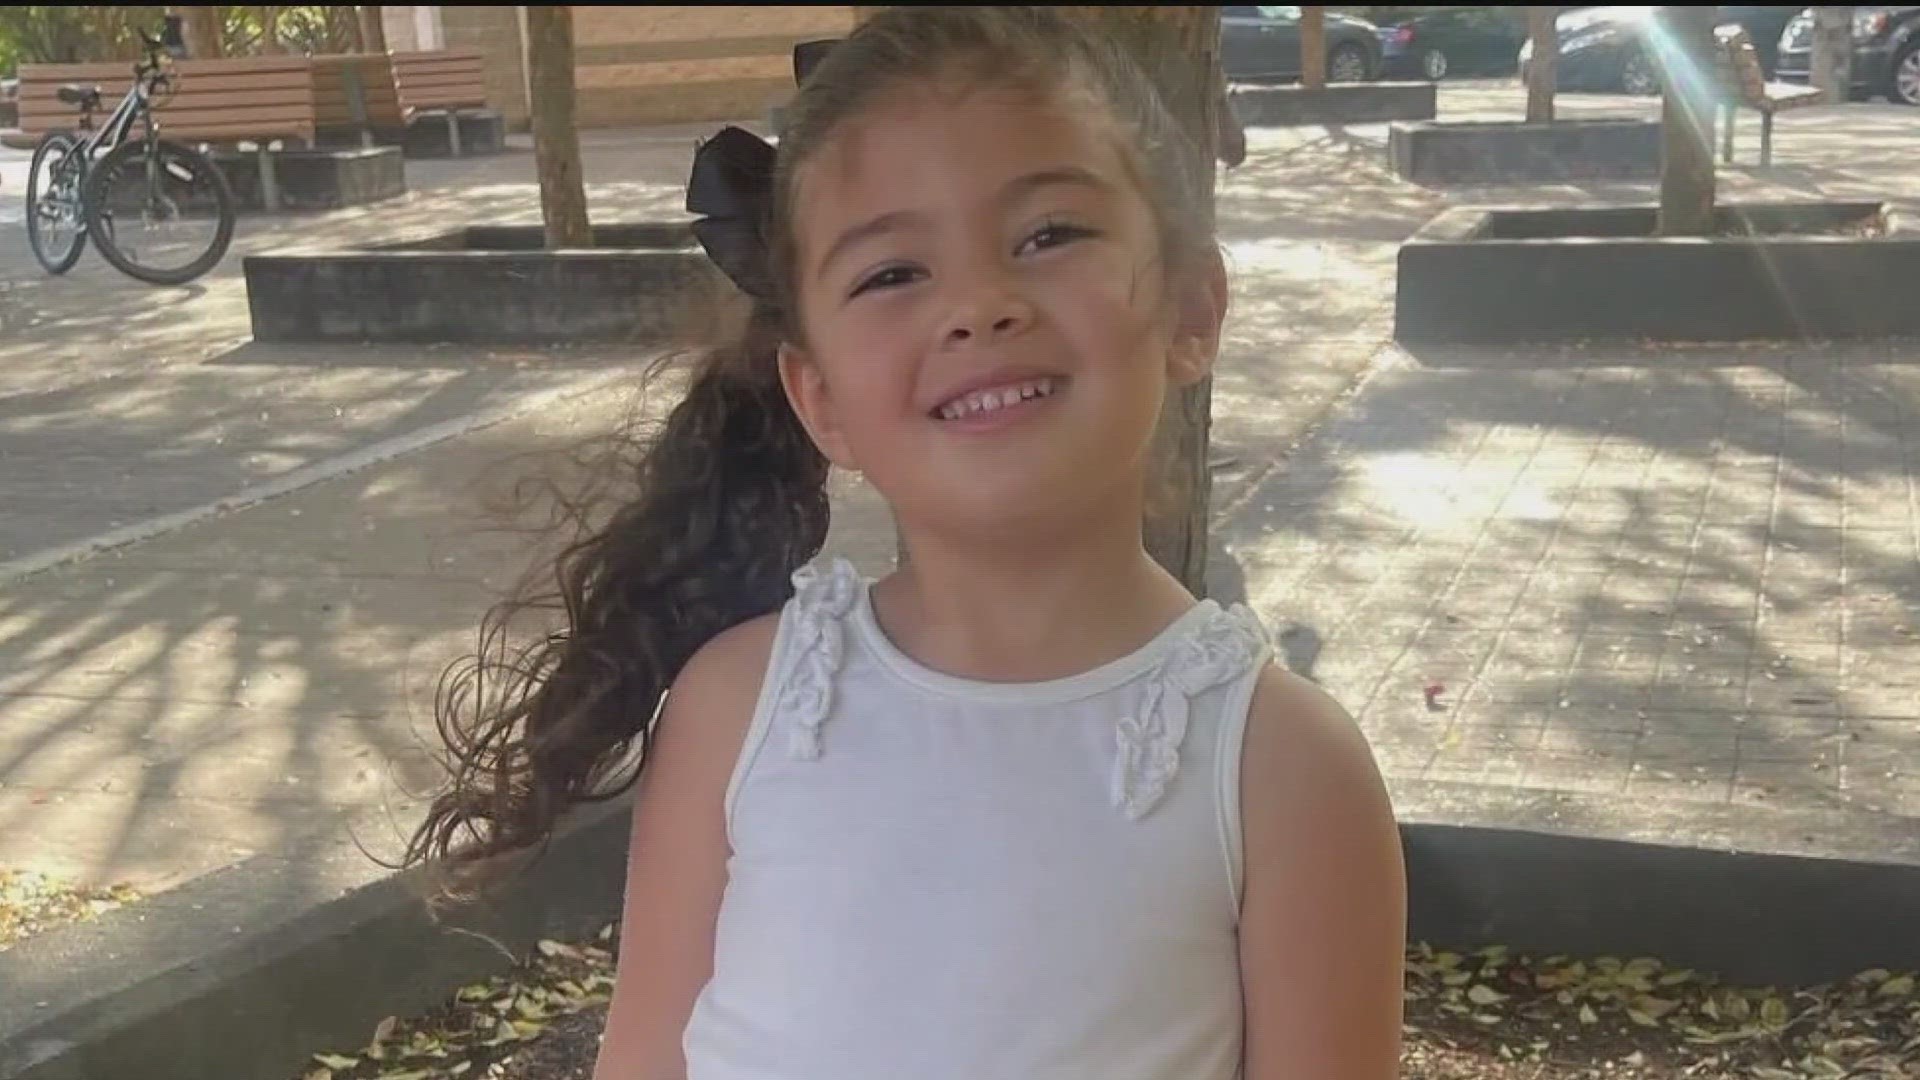 Abigail Hernandez, 4, along with her father and 7-year-old sister, were hit by a pickup truck while crossing a busy road at the Mall of Georgia on Sunday.